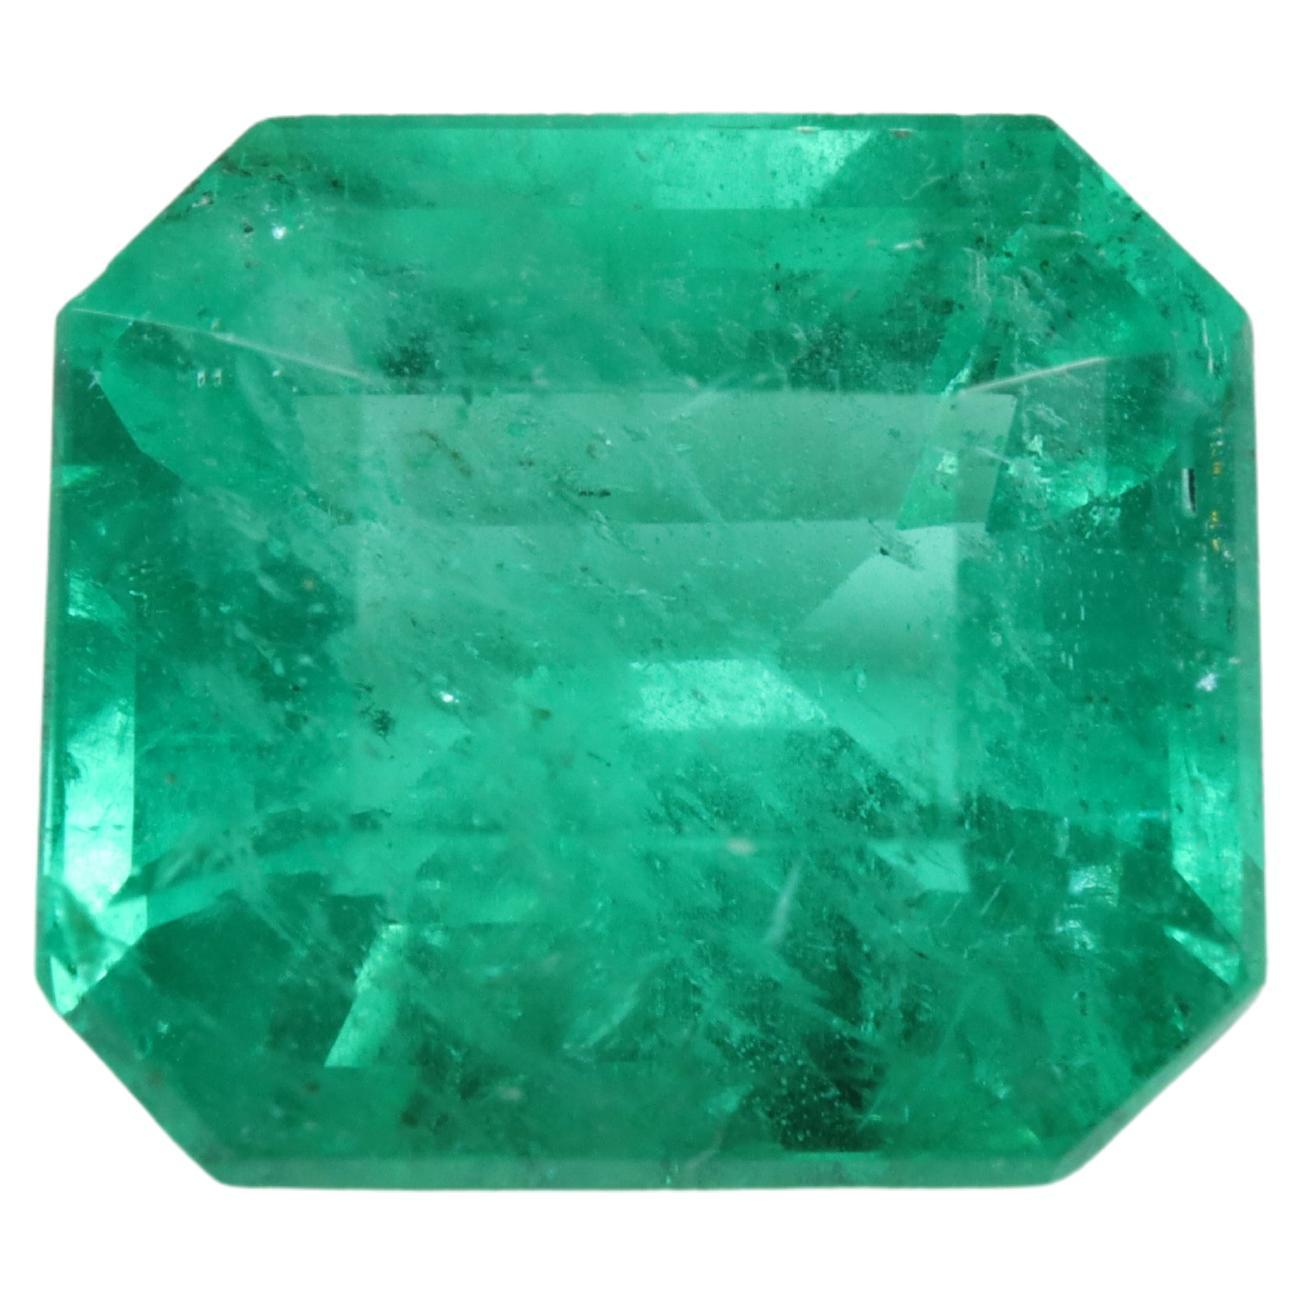 Certified Intense / Vivid Green Emerald 2.09ct 8x7 For Sale